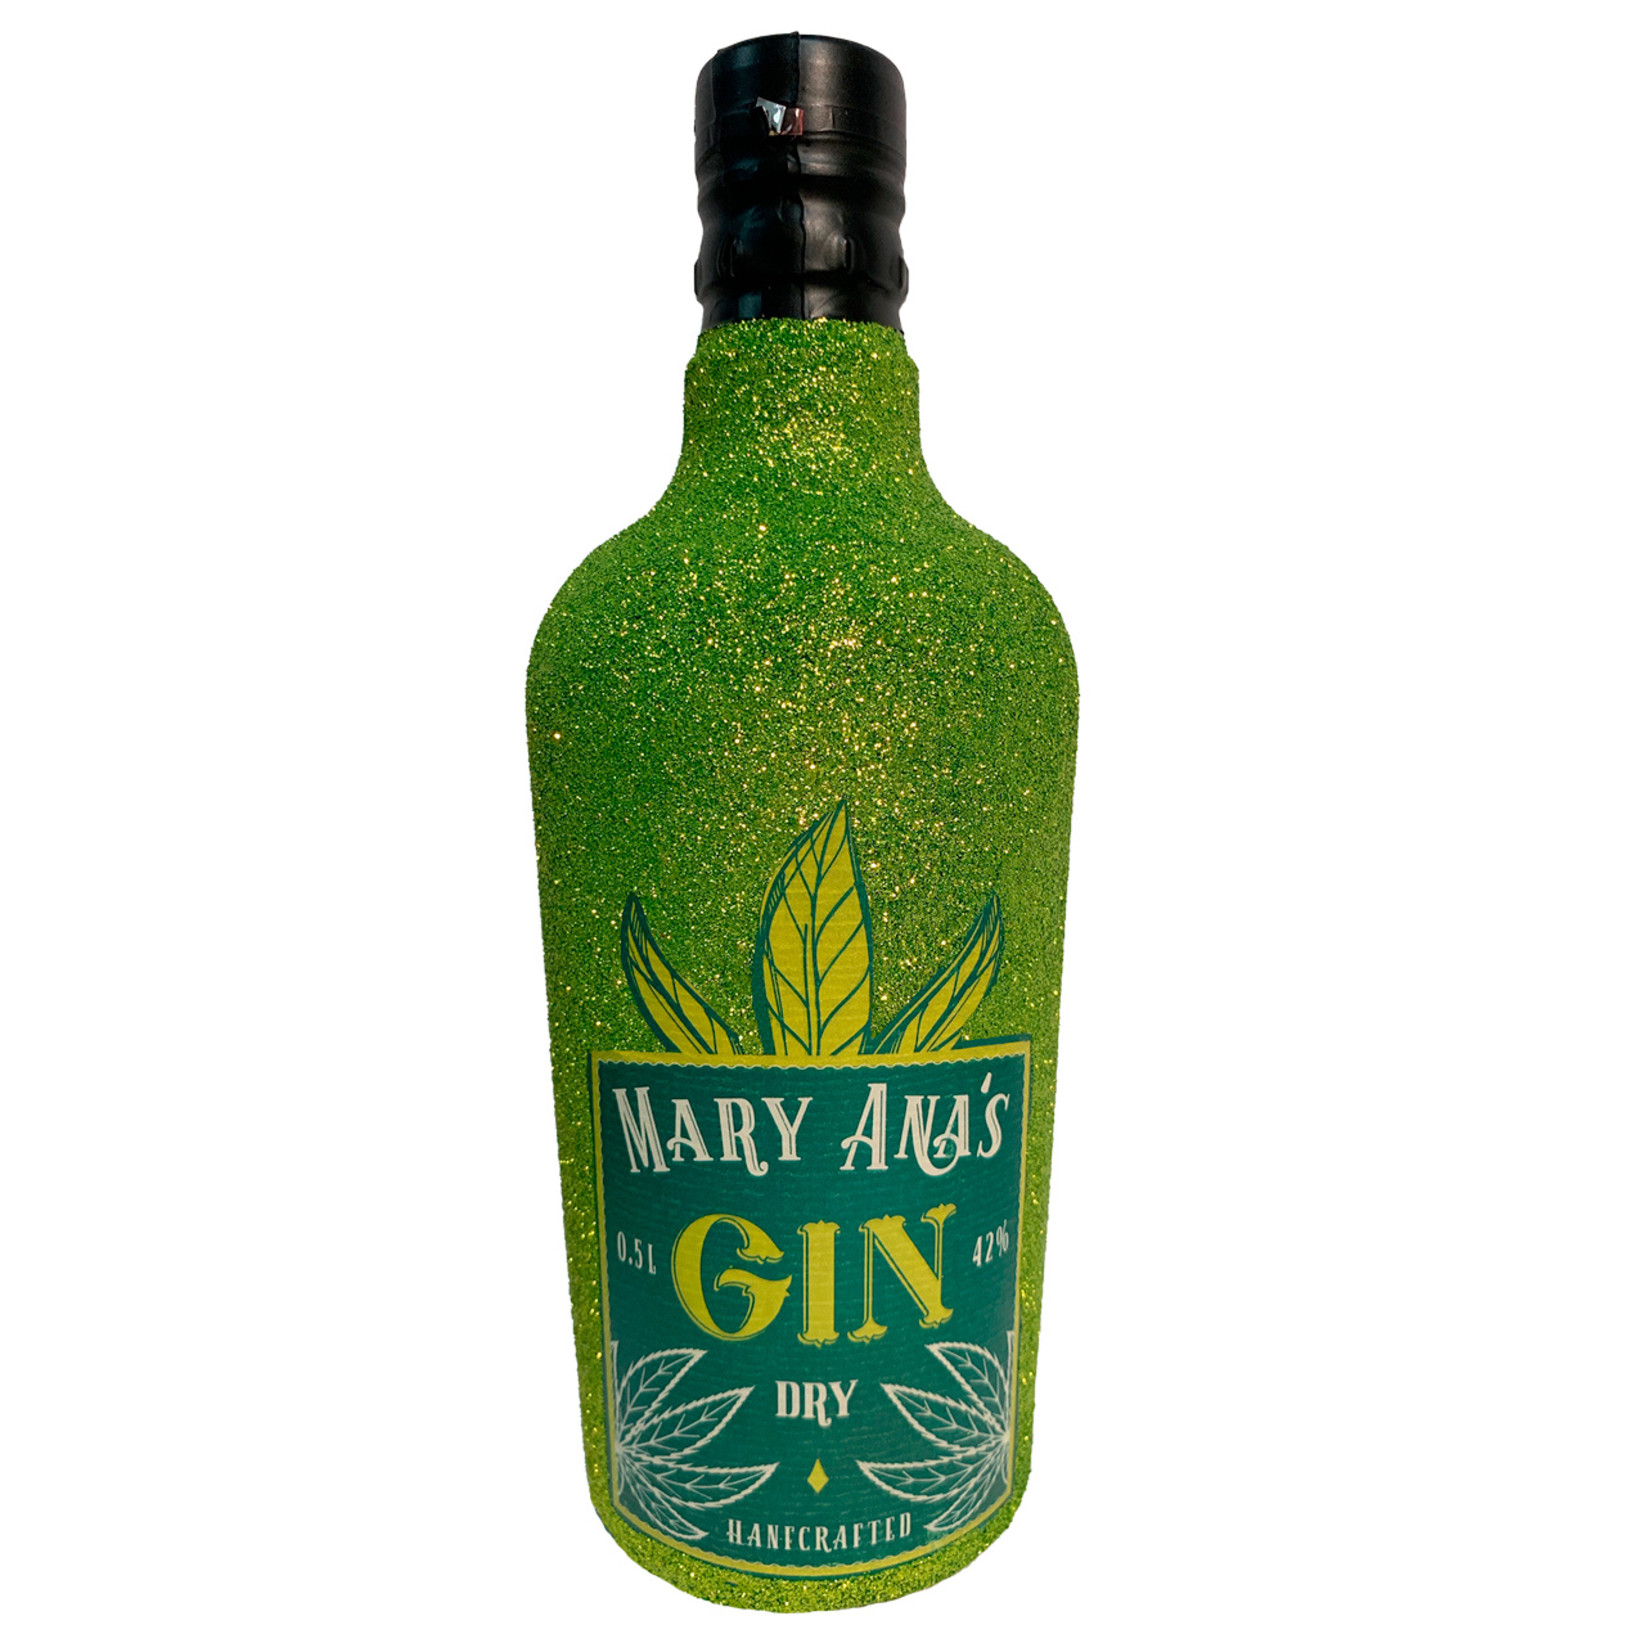 Gin Glitzer Mary Anas Hanfcrafted Gin (0,5L)